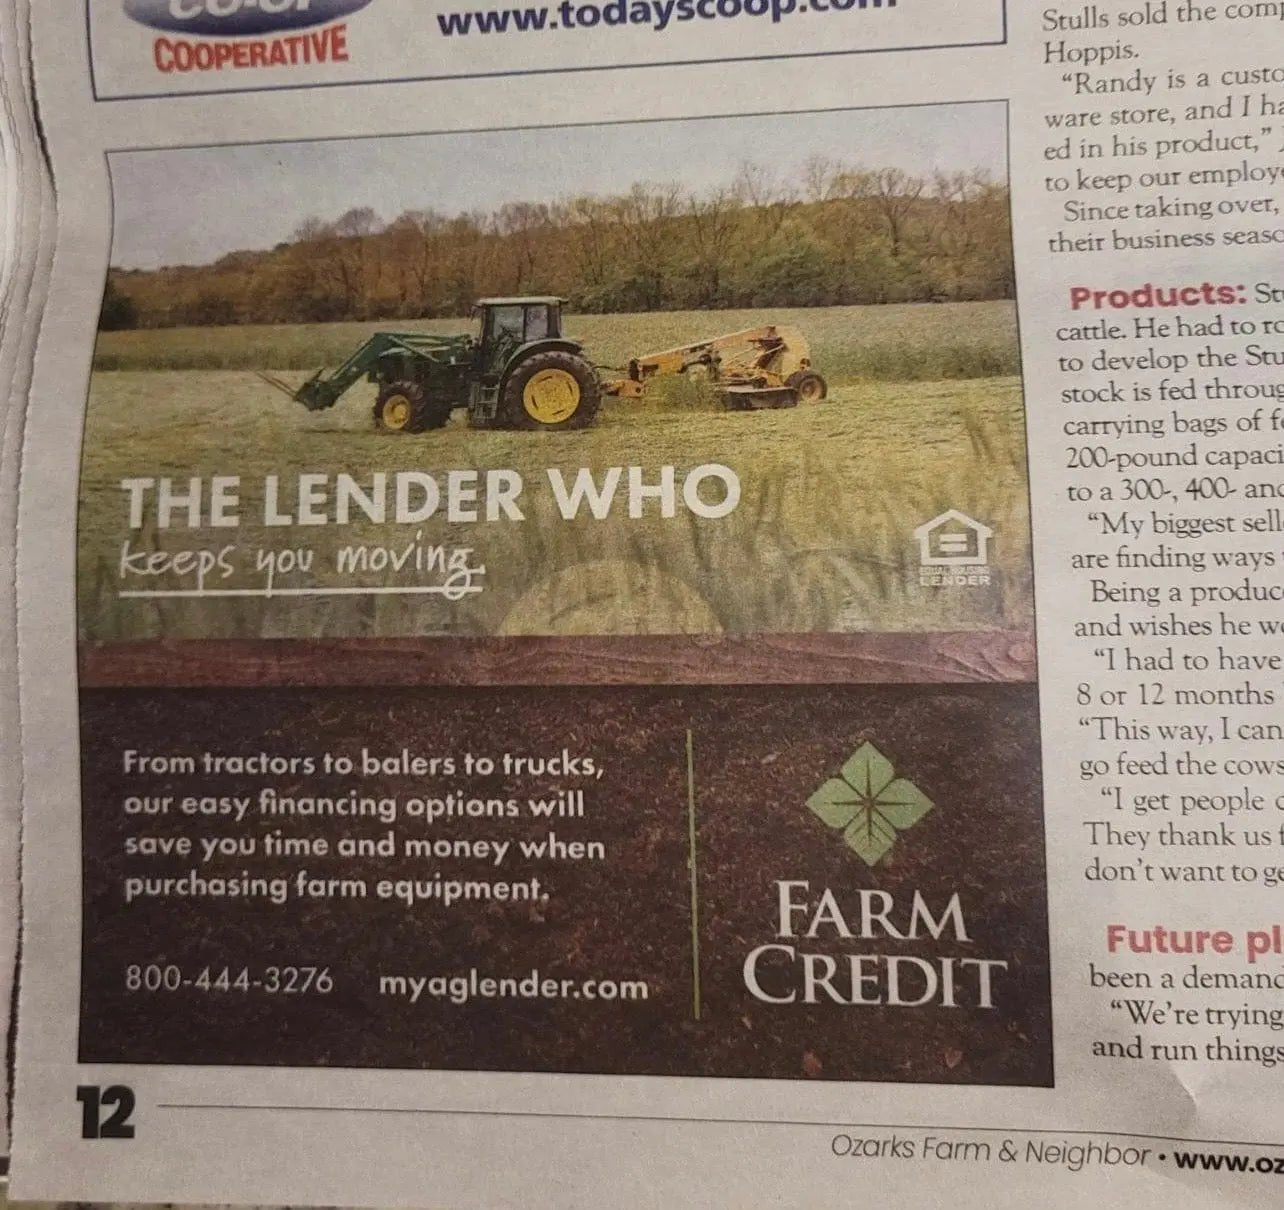 lisa blount fine art used as the advertisement for farm credit in the newspaper